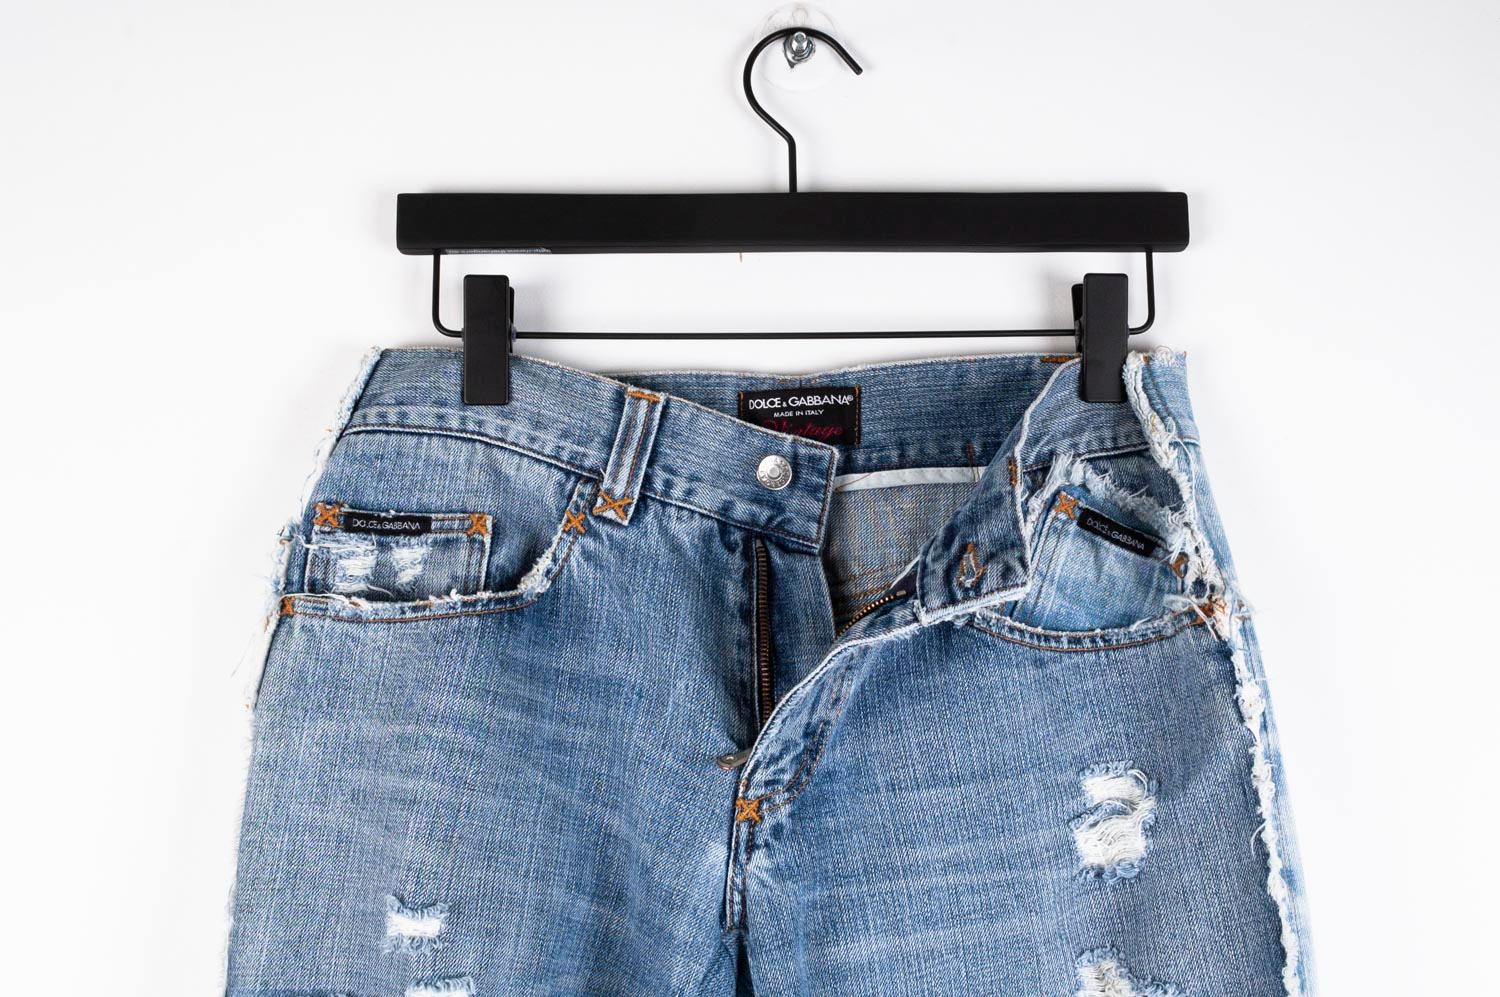 Item for sale is 100% genuine Dolce&Gabbana Vintage Denim Distressed Ripped Knees Men Jeans 
Color: Blue
(An actual color may a bit vary due to individual computer screen interpretation)
Material: 100% cotton
Tag size: ITA 48 (runs loose fit)
These